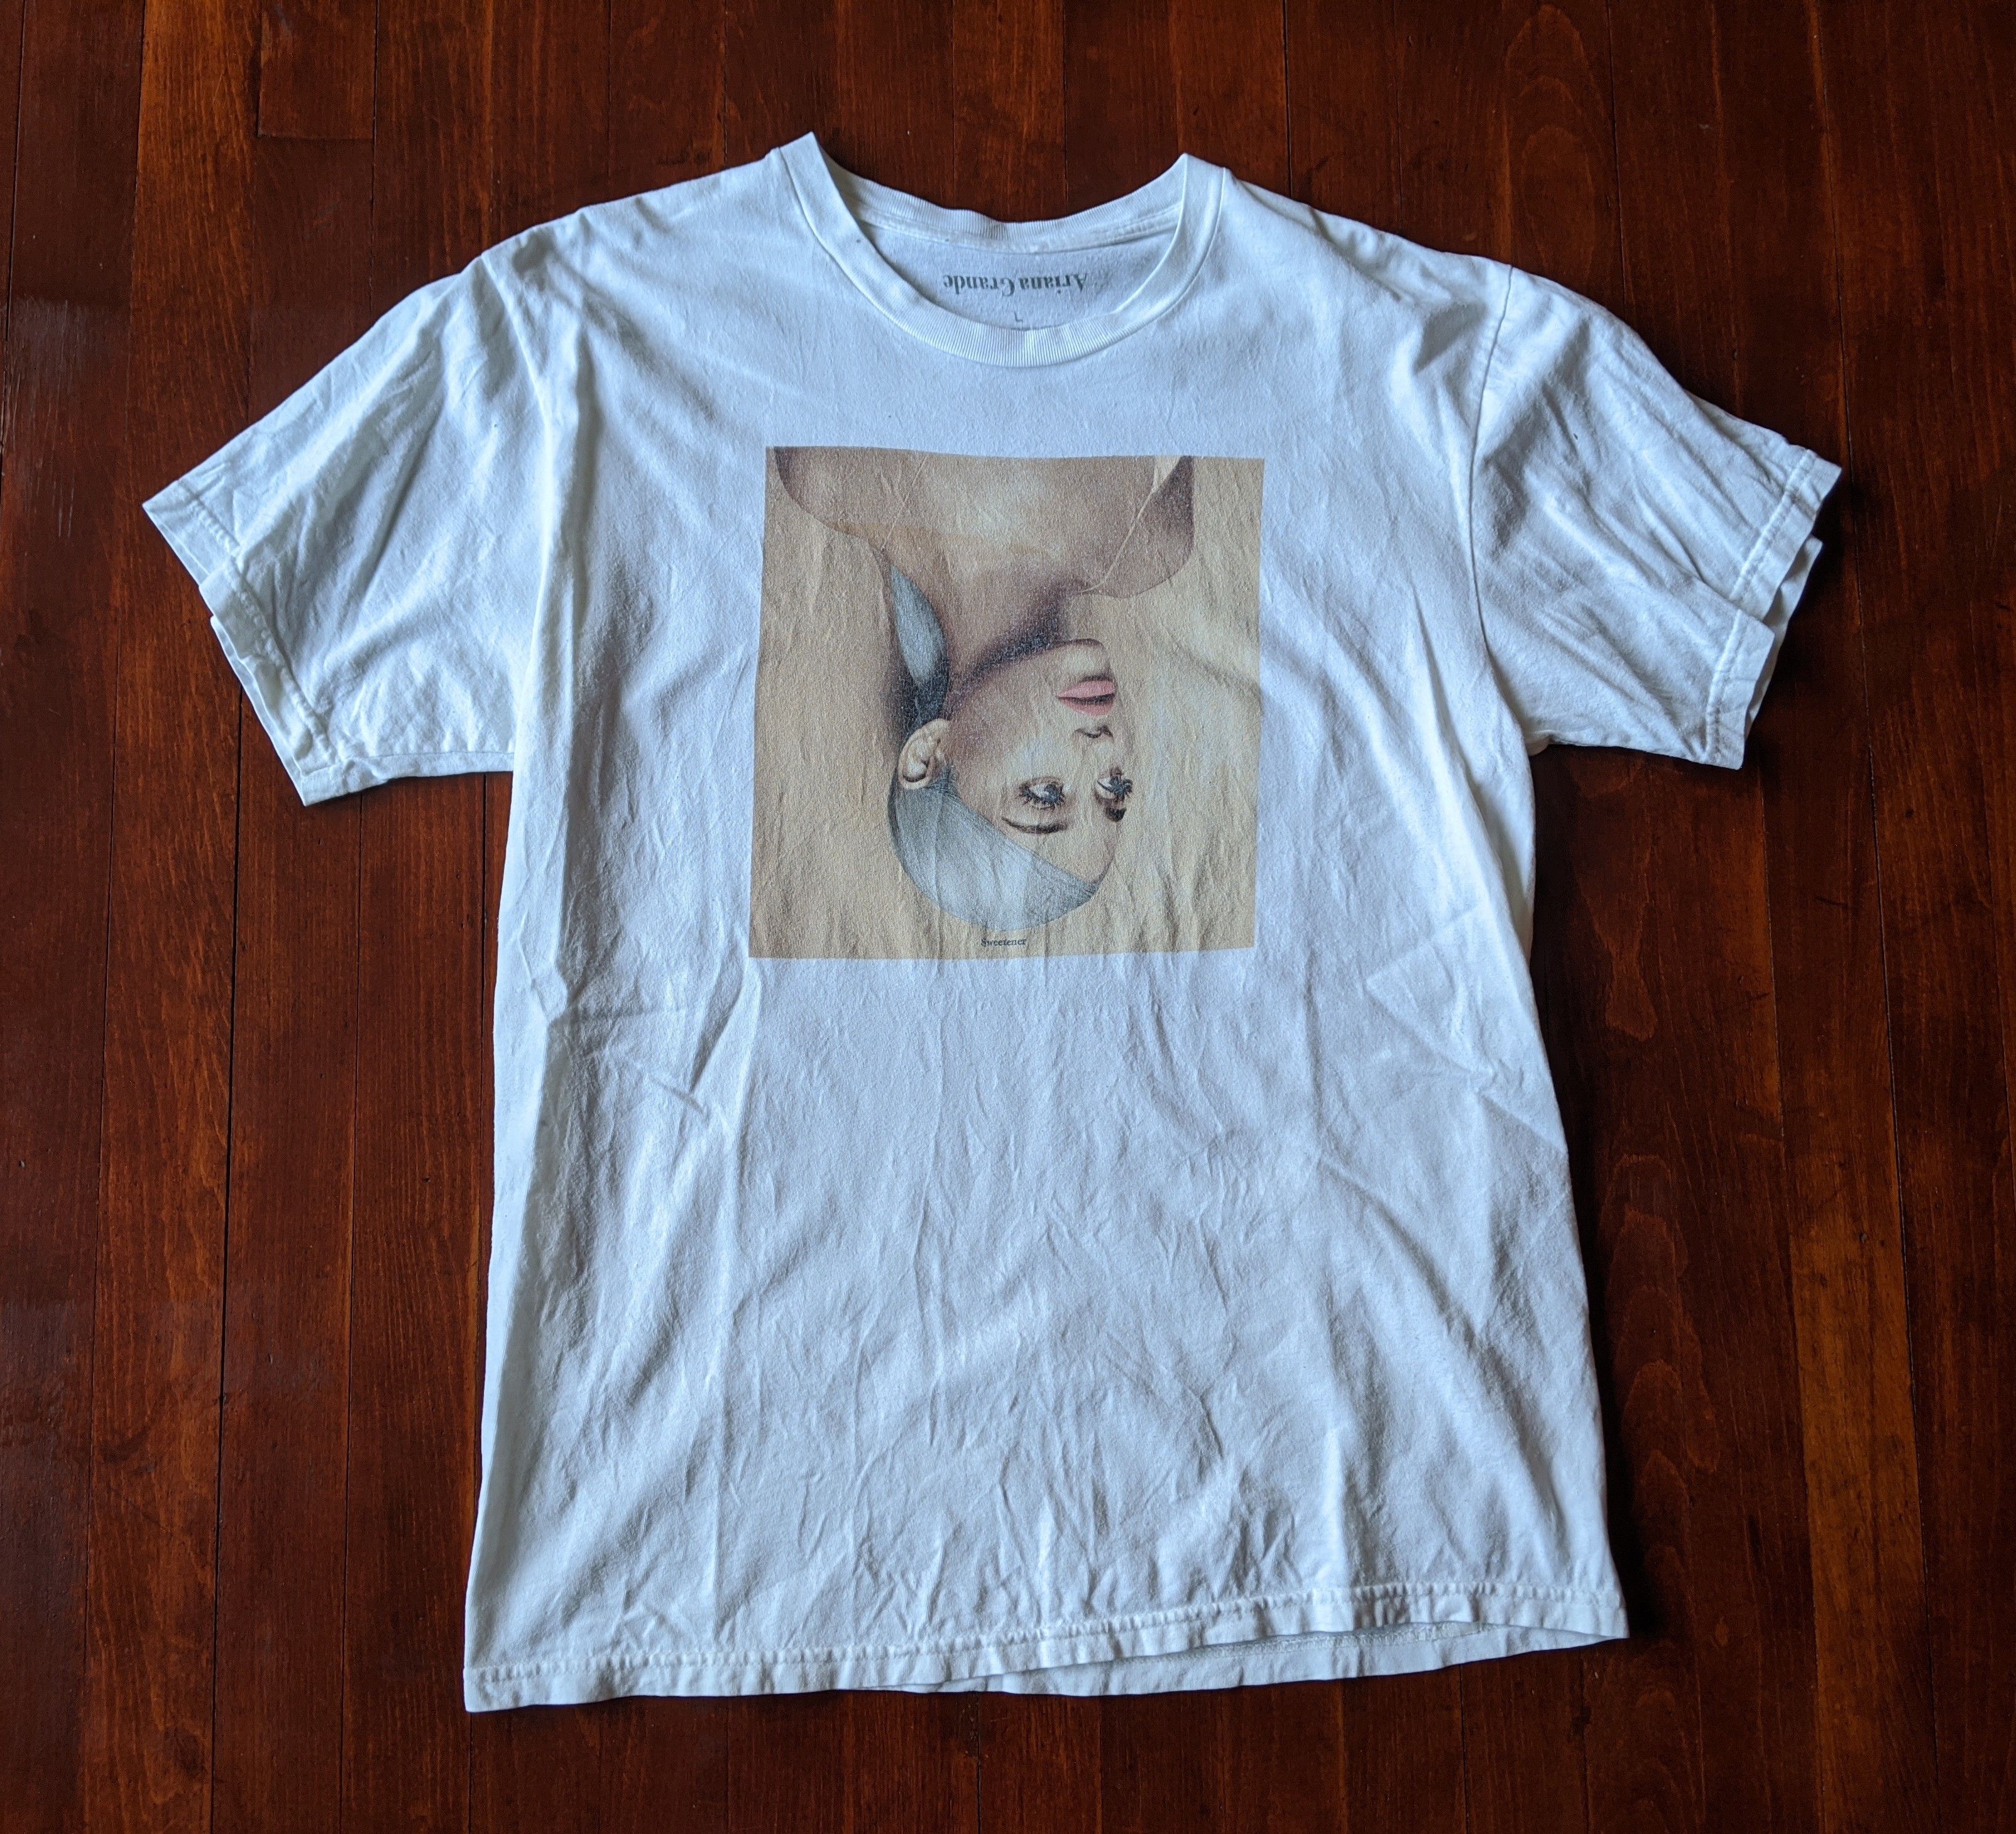 Other Ariana Grande Sweetener 2018 Tour T Shirt Size L Size US L / EU 52-54 / 3 - 1 Preview